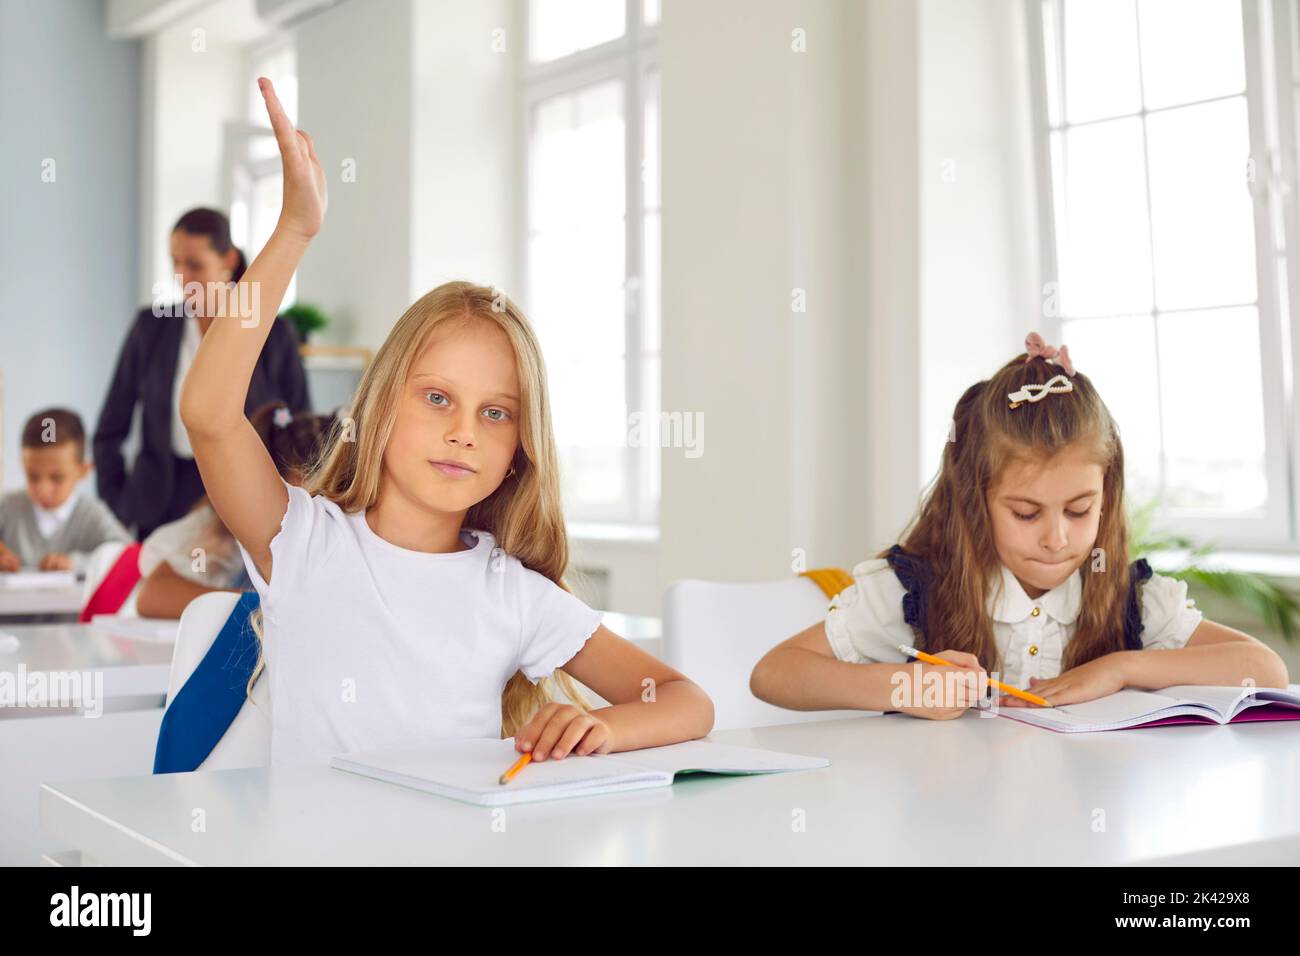 Smart little schoolgirl raises her hand during lesson, wanting to answer teacher's question. Stock Photo